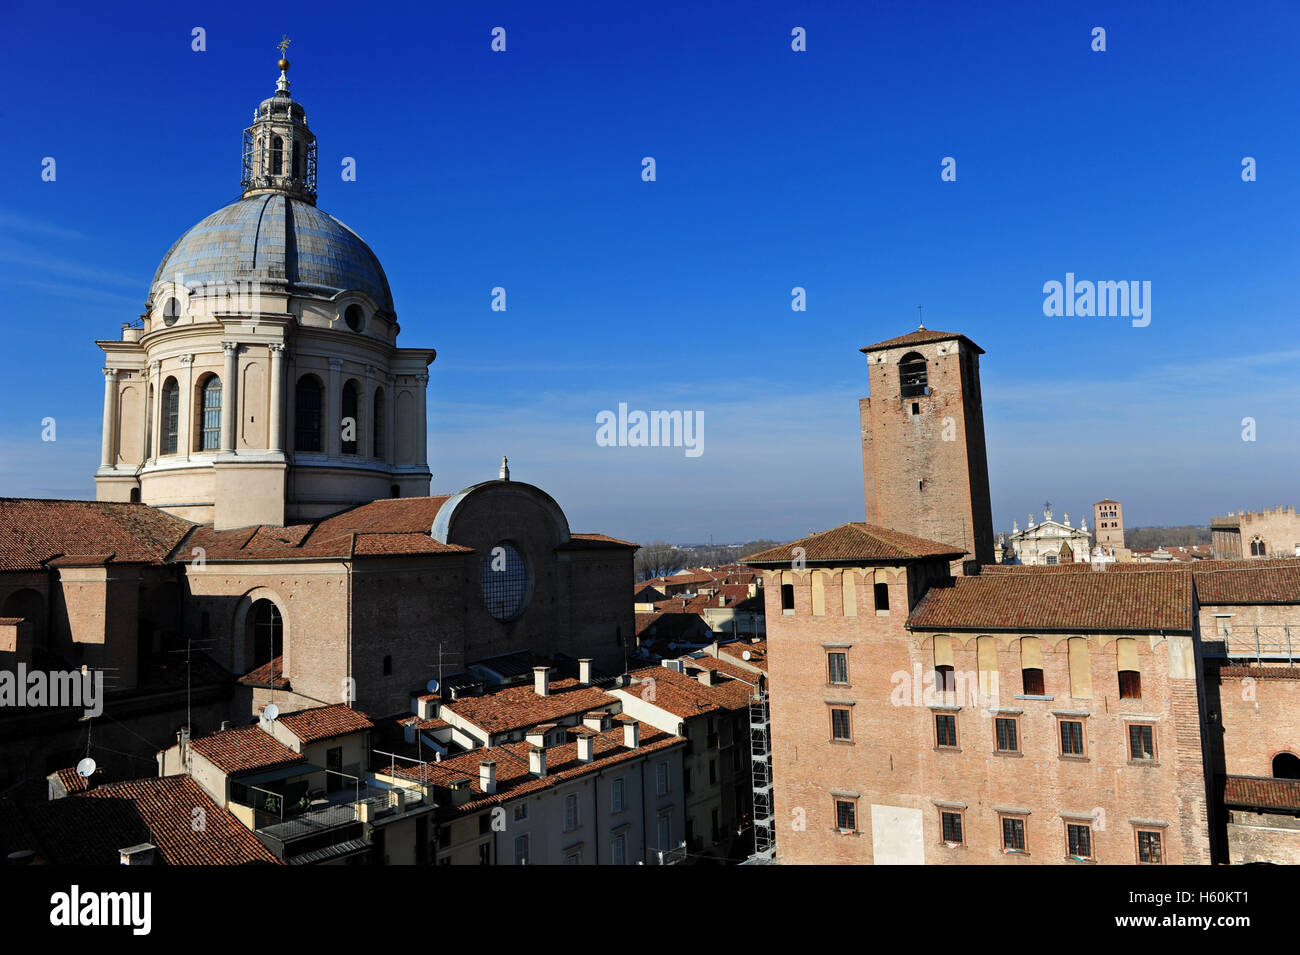 Aerial view of Piazza delle erbe with the dome of Sant'Andrea, Mantua, Italy Stock Photo